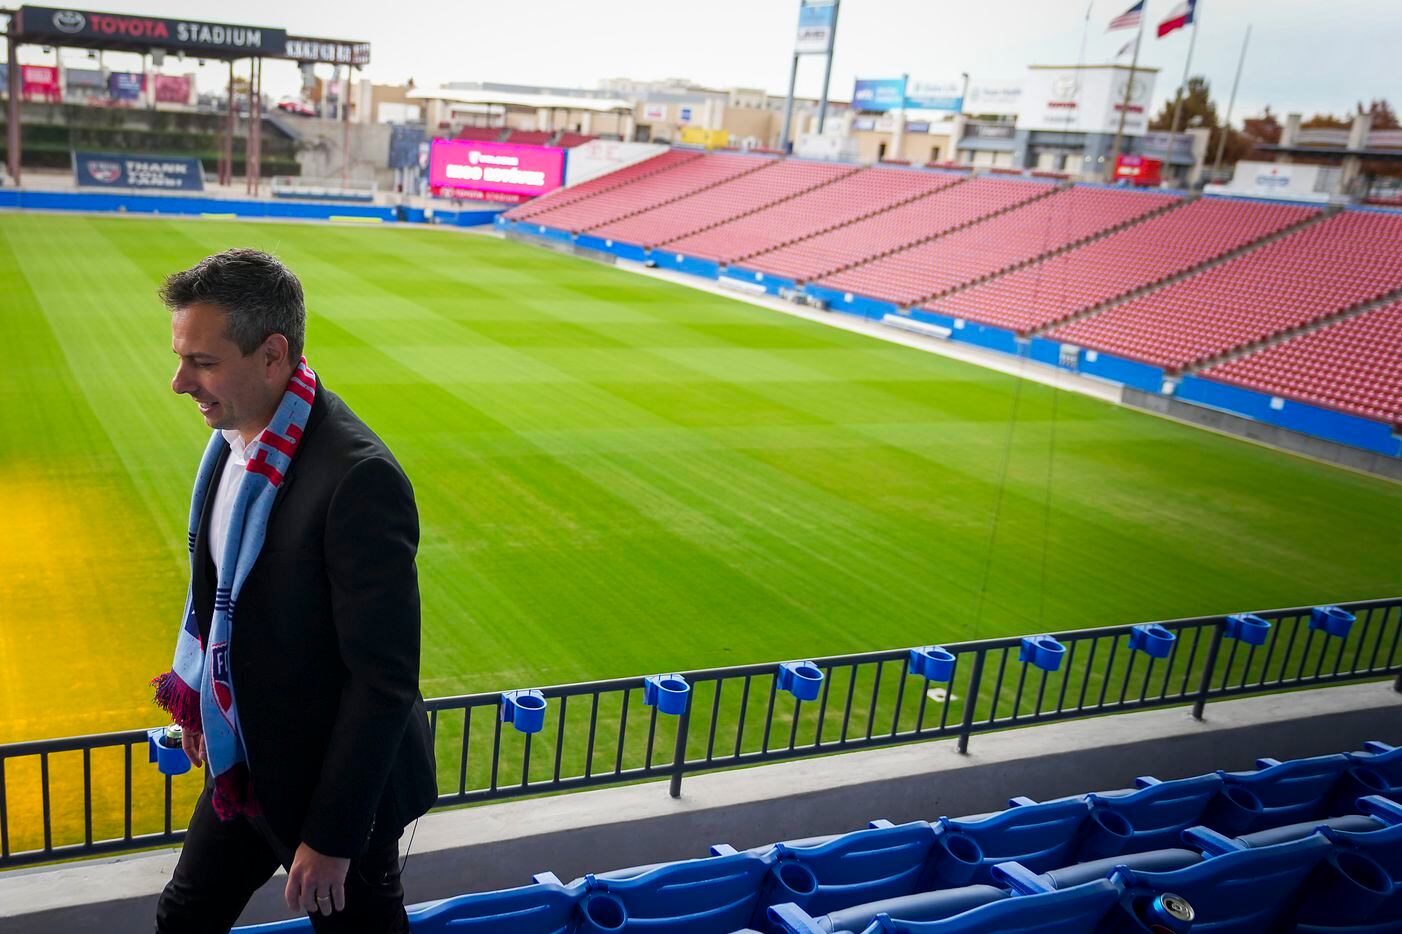 New FC Dallas head coach Nico Estévez walks through the stands at Toyota Stadium after his introductory press conference at the National Soccer Hall of Fame on Friday, Dec. 3, 2021, in Frisco, Texas.